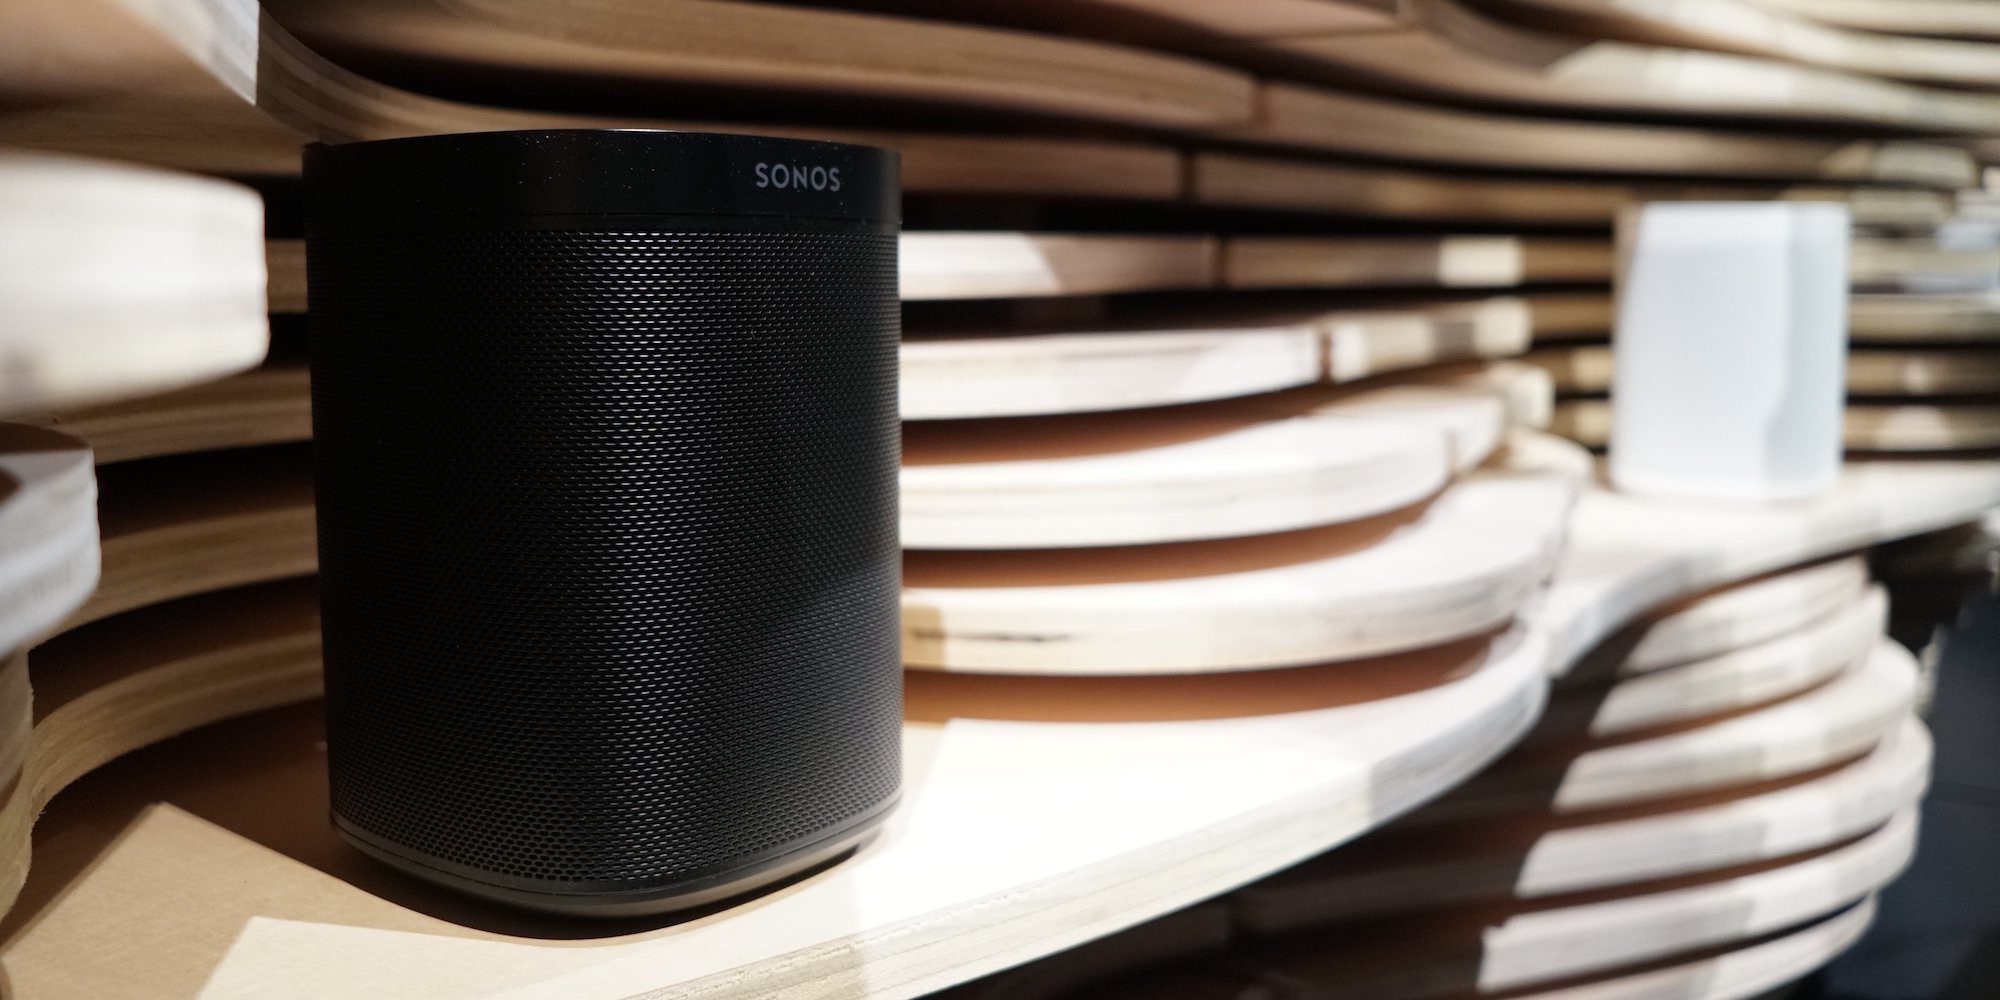 Sonos One Gen 2 speaker delivers AirPlay 2 at new low of $134